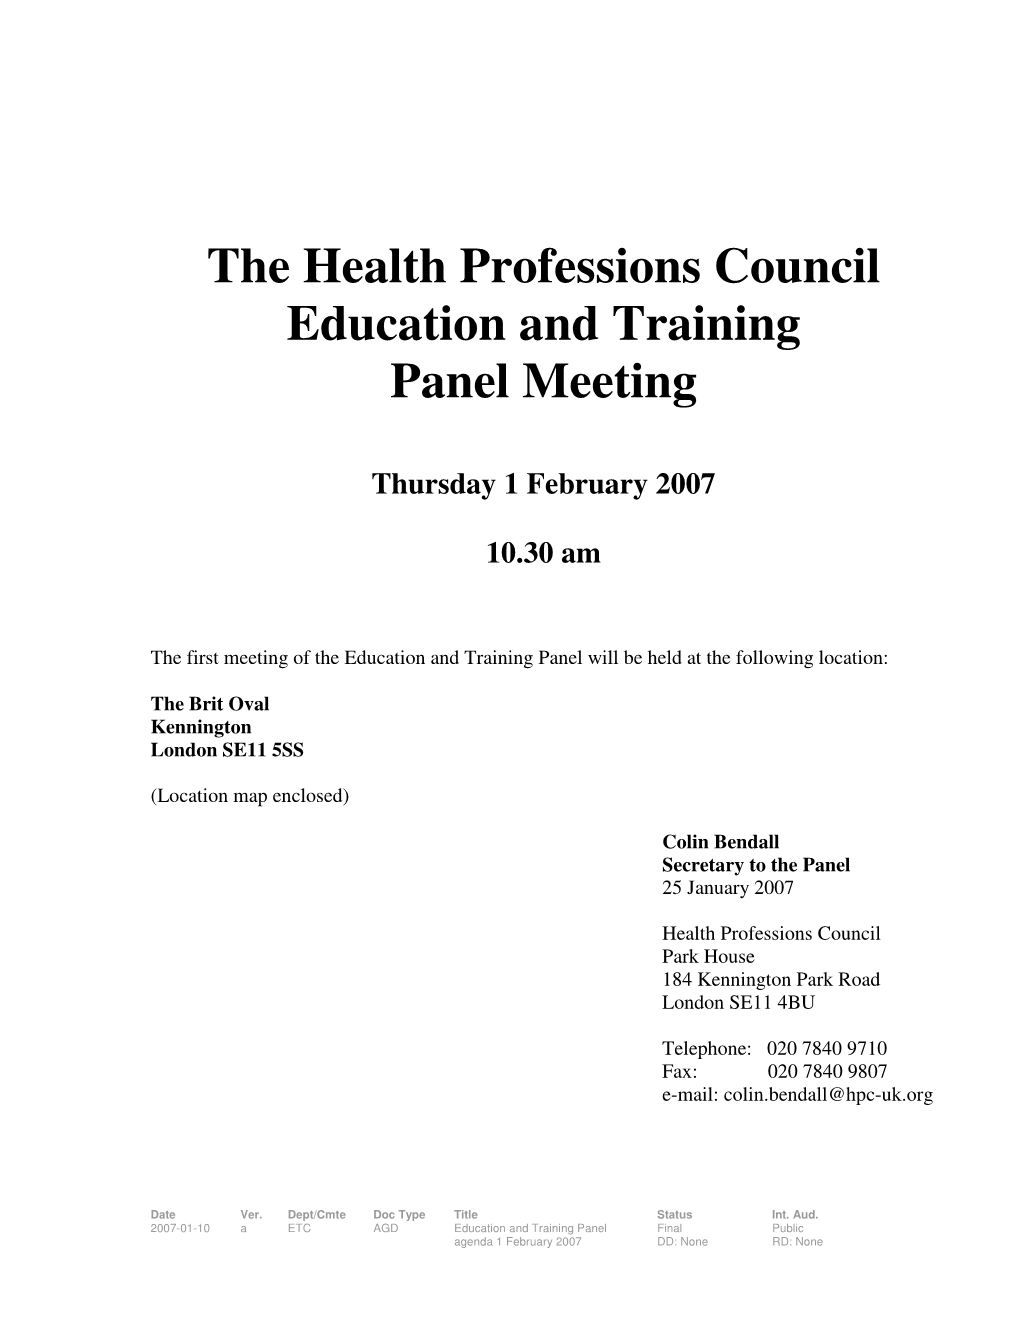 The Health Professions Council Education and Training Panel Meeting